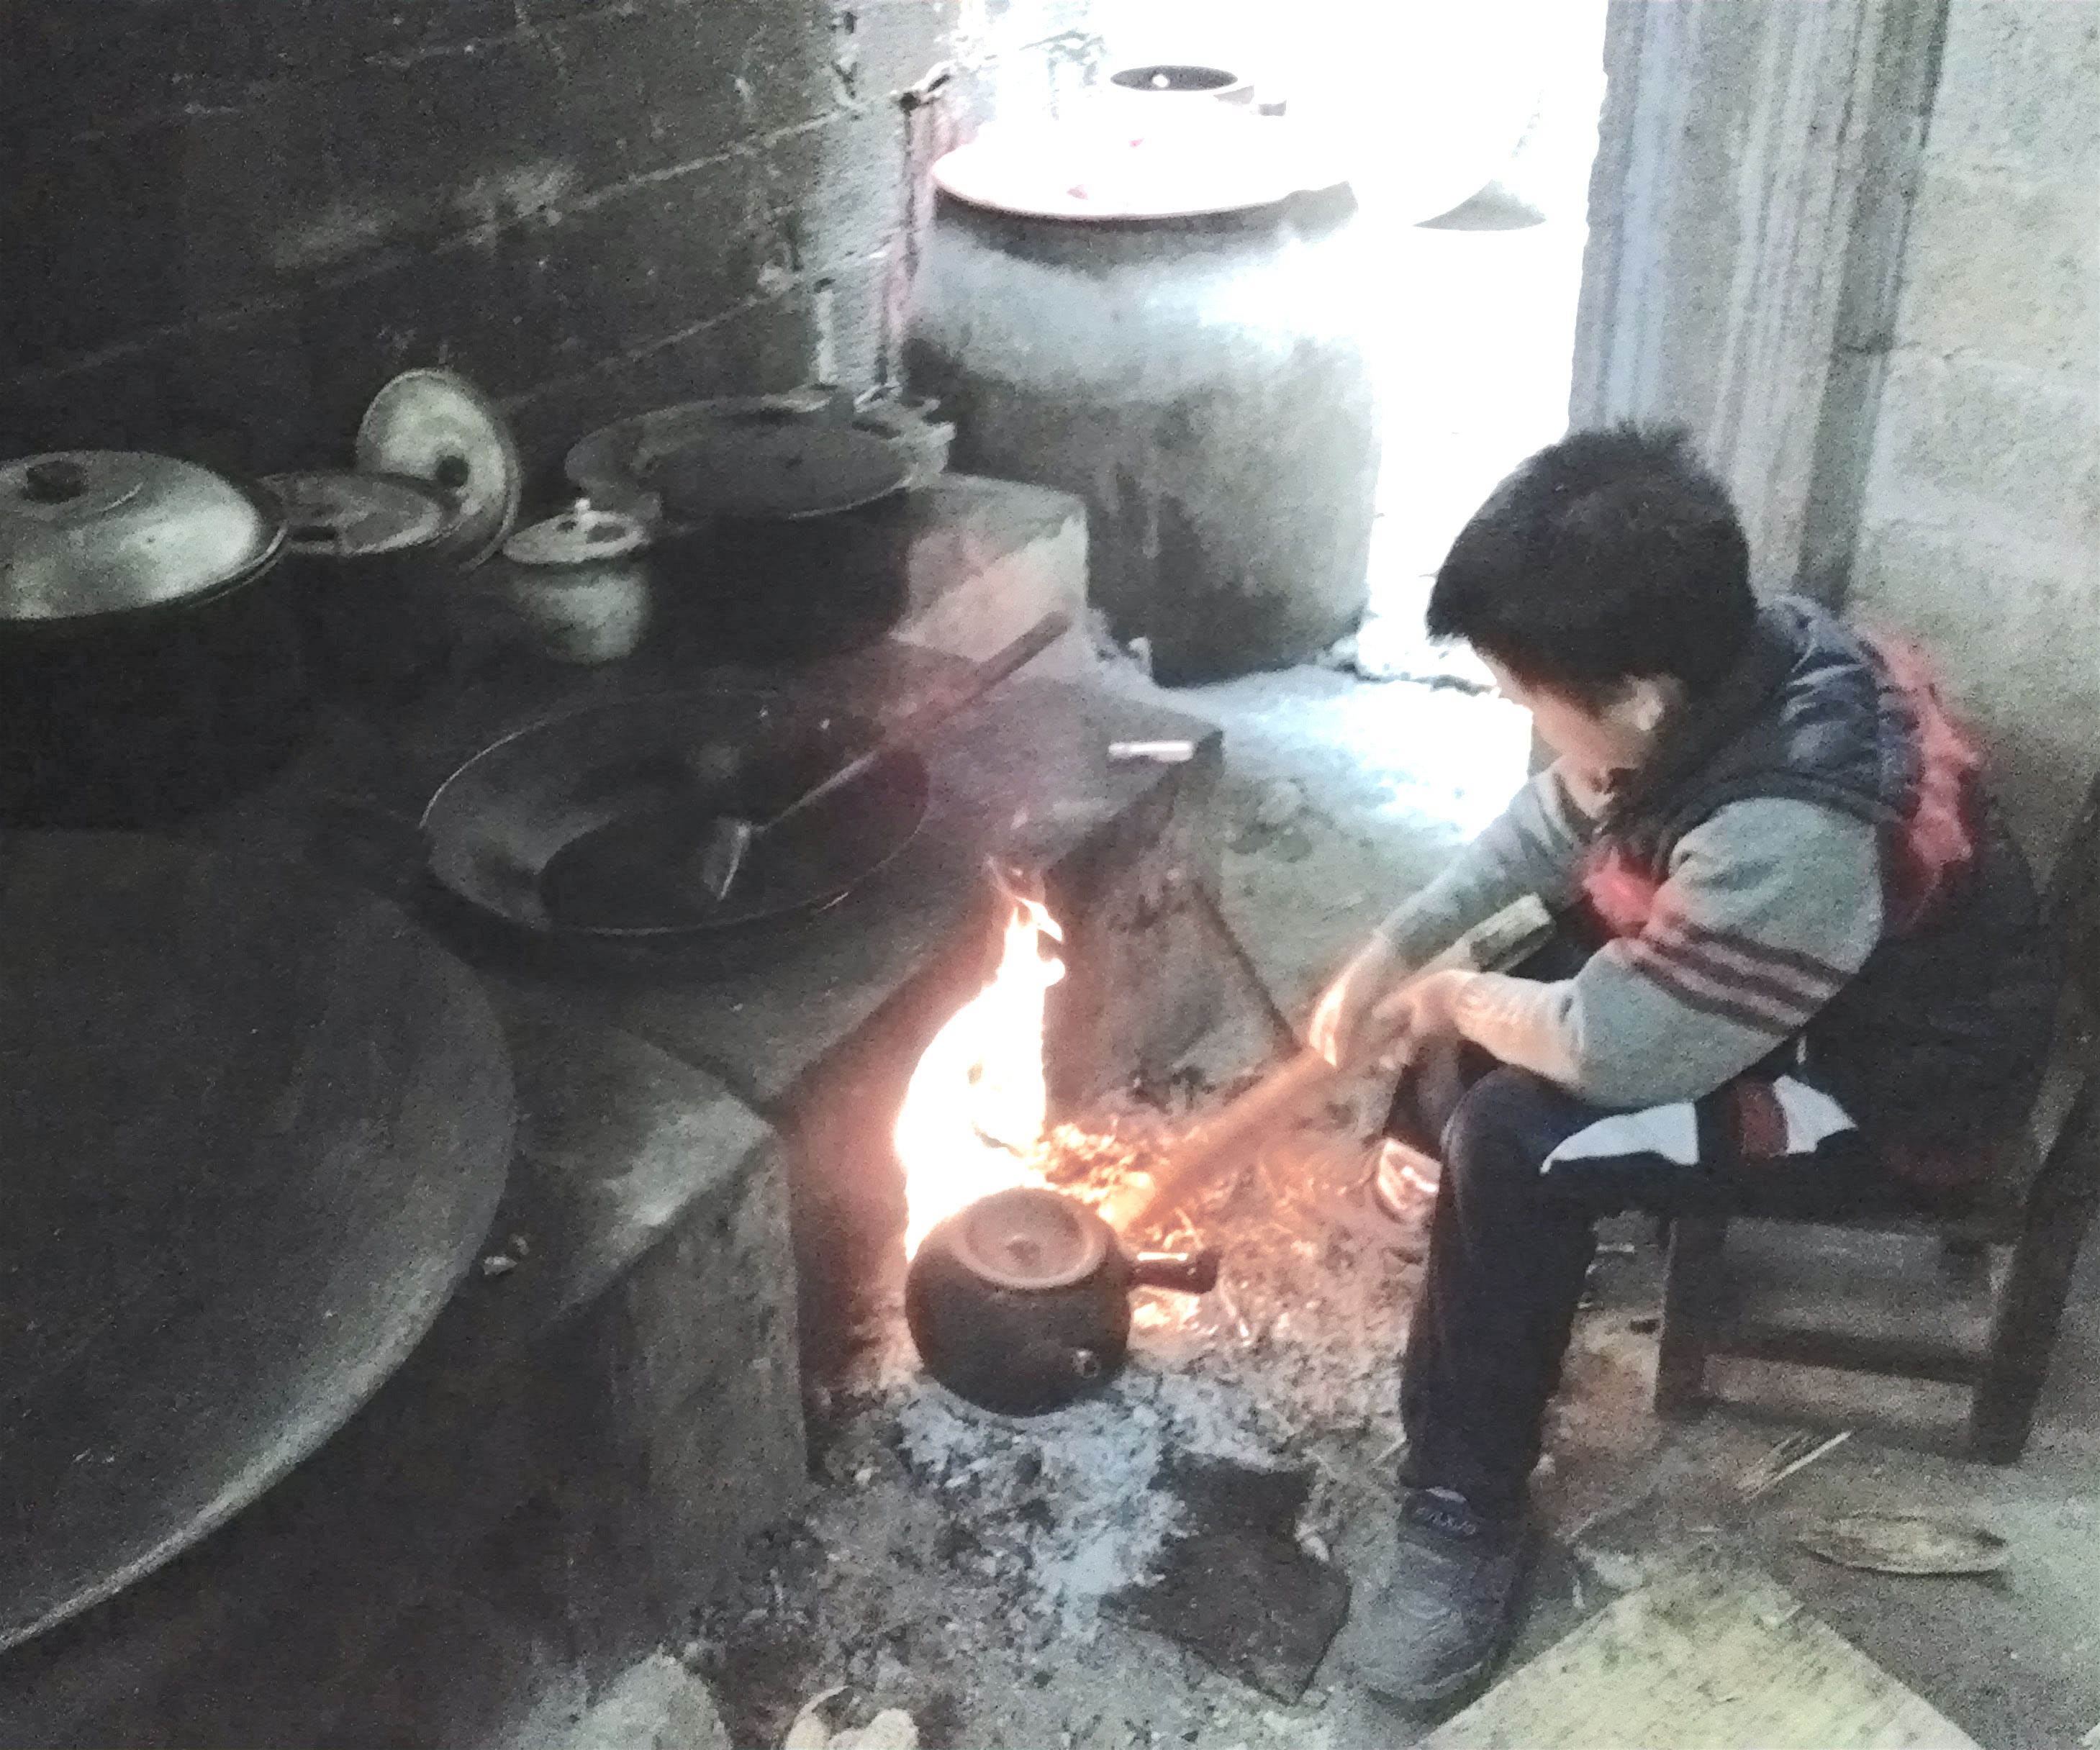 Most people living in rural China treat their water via boiling, a practice that can produce harmful indoor air pollution. Photo courtesy of Alasdair Cohen.